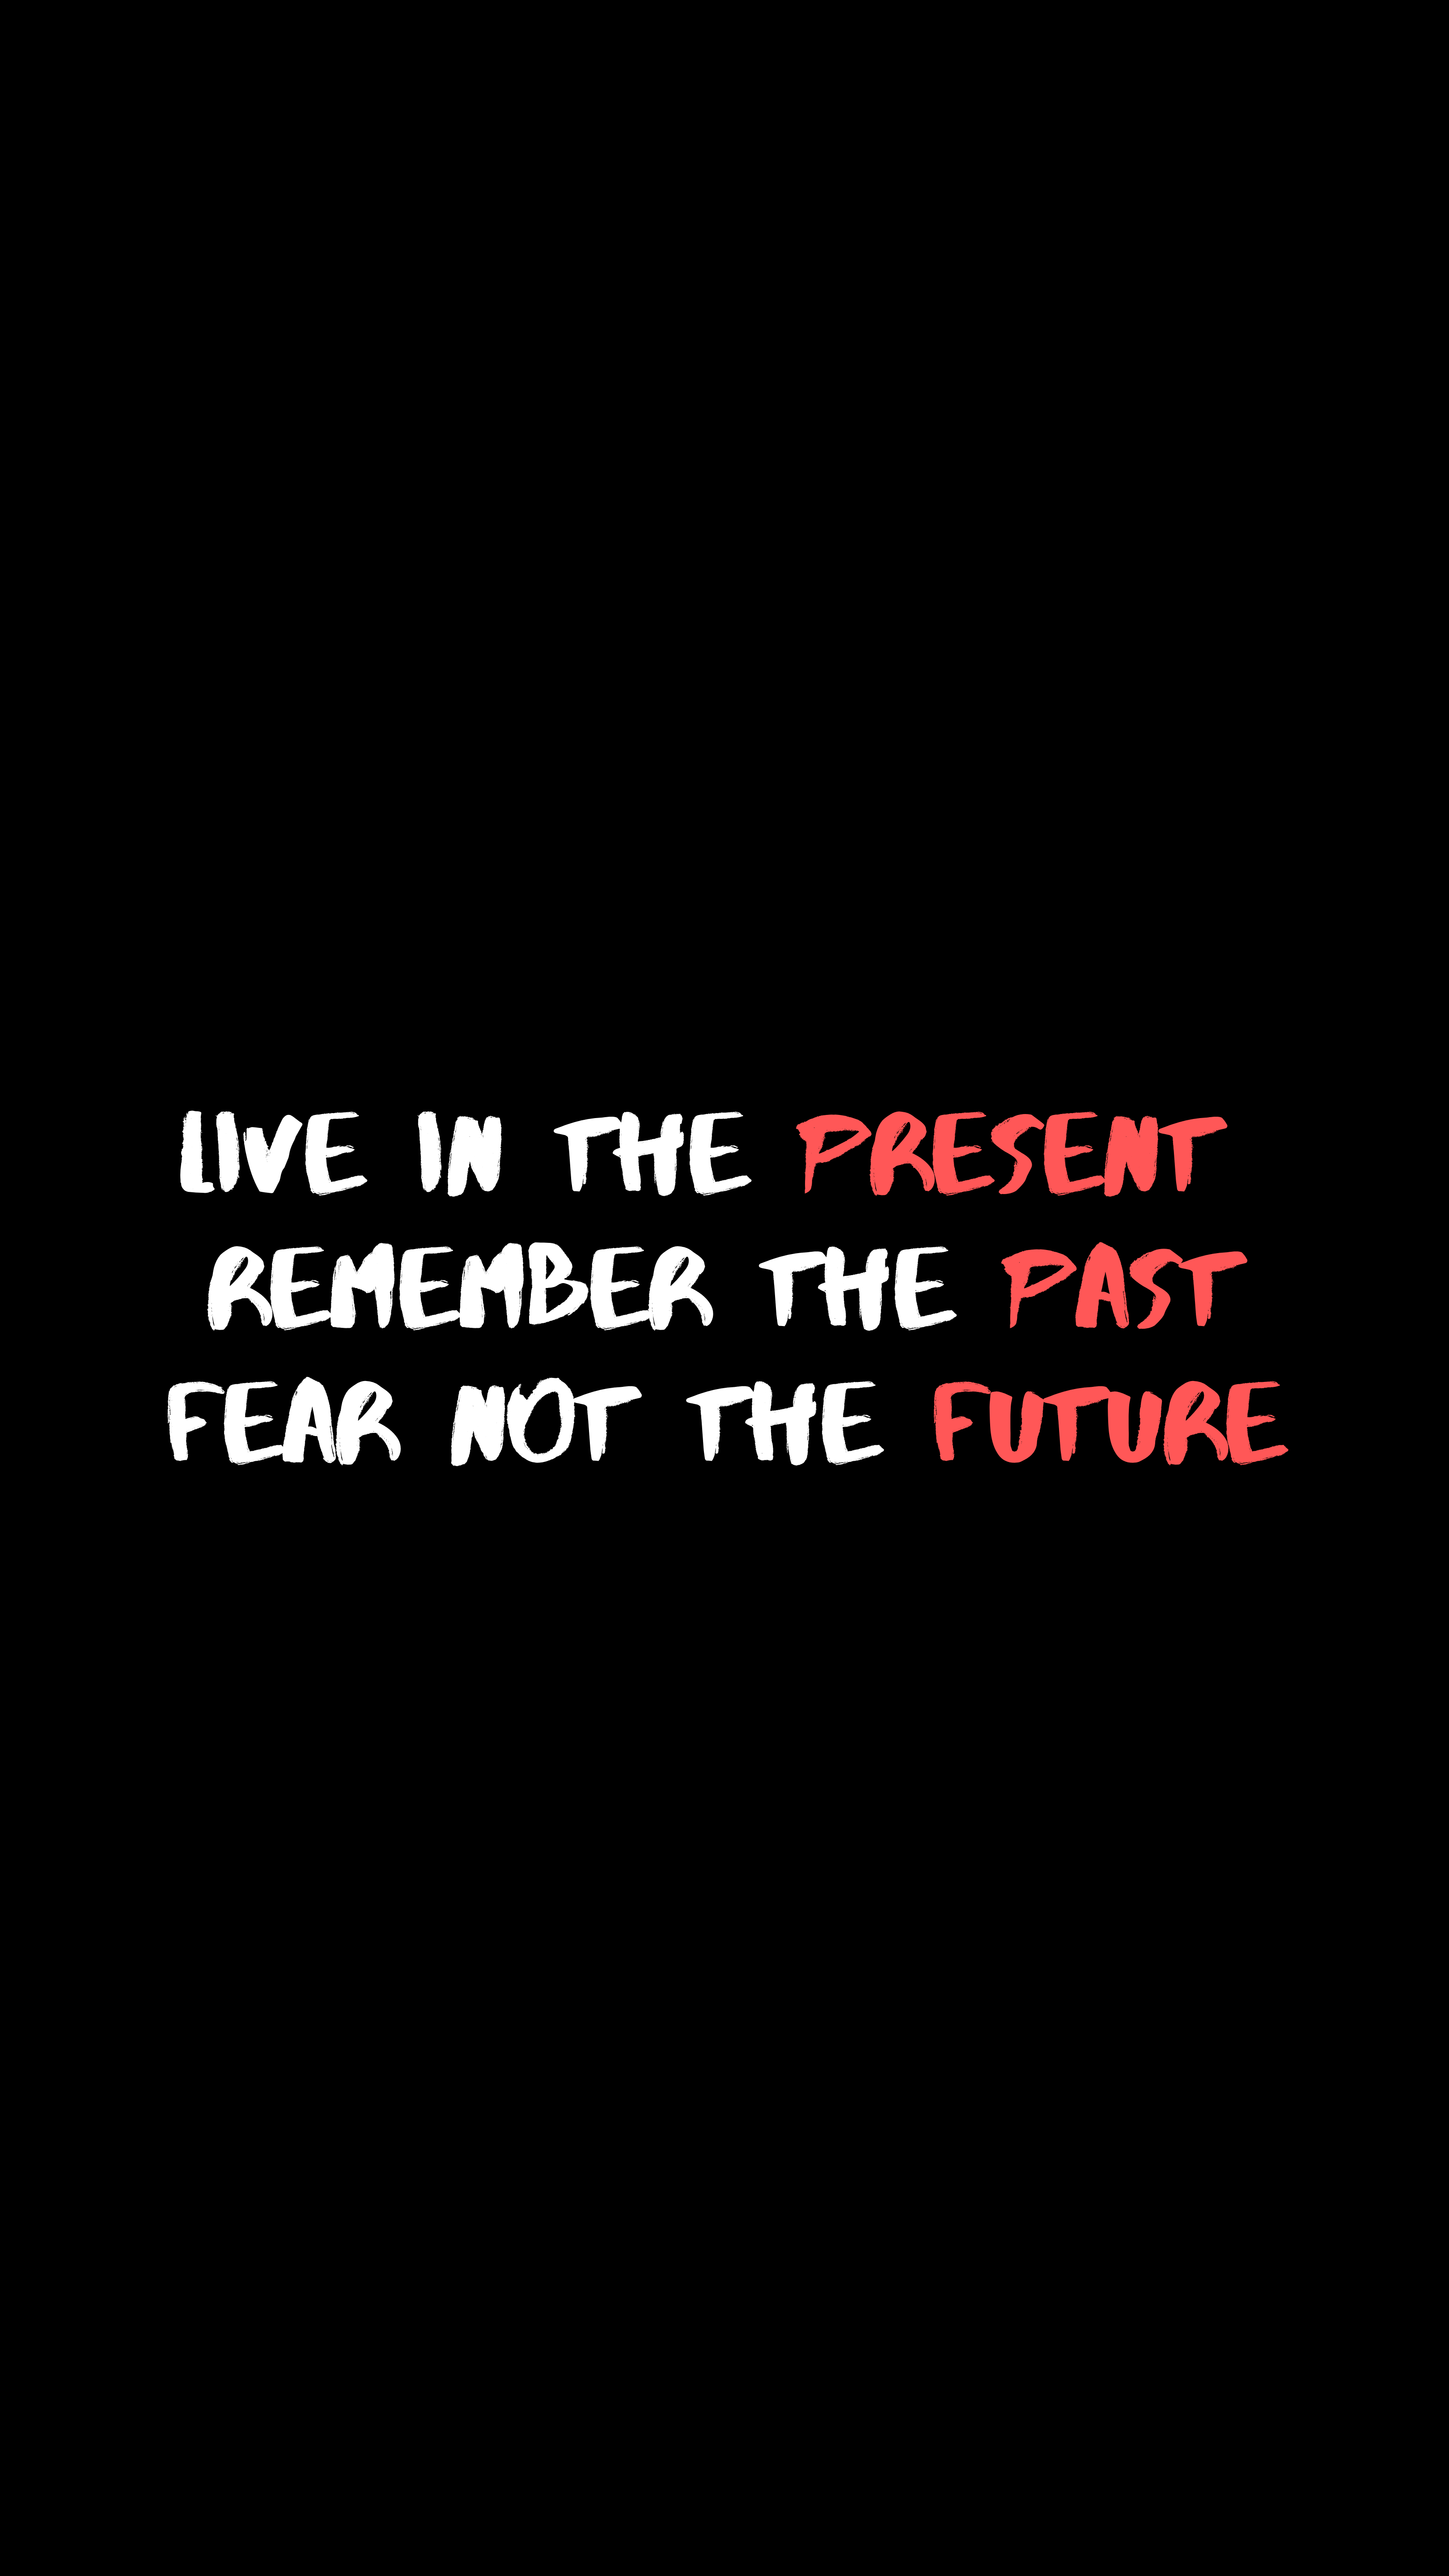 wallpapers motivation, words, future, quotation, inspiration, quote, present, past